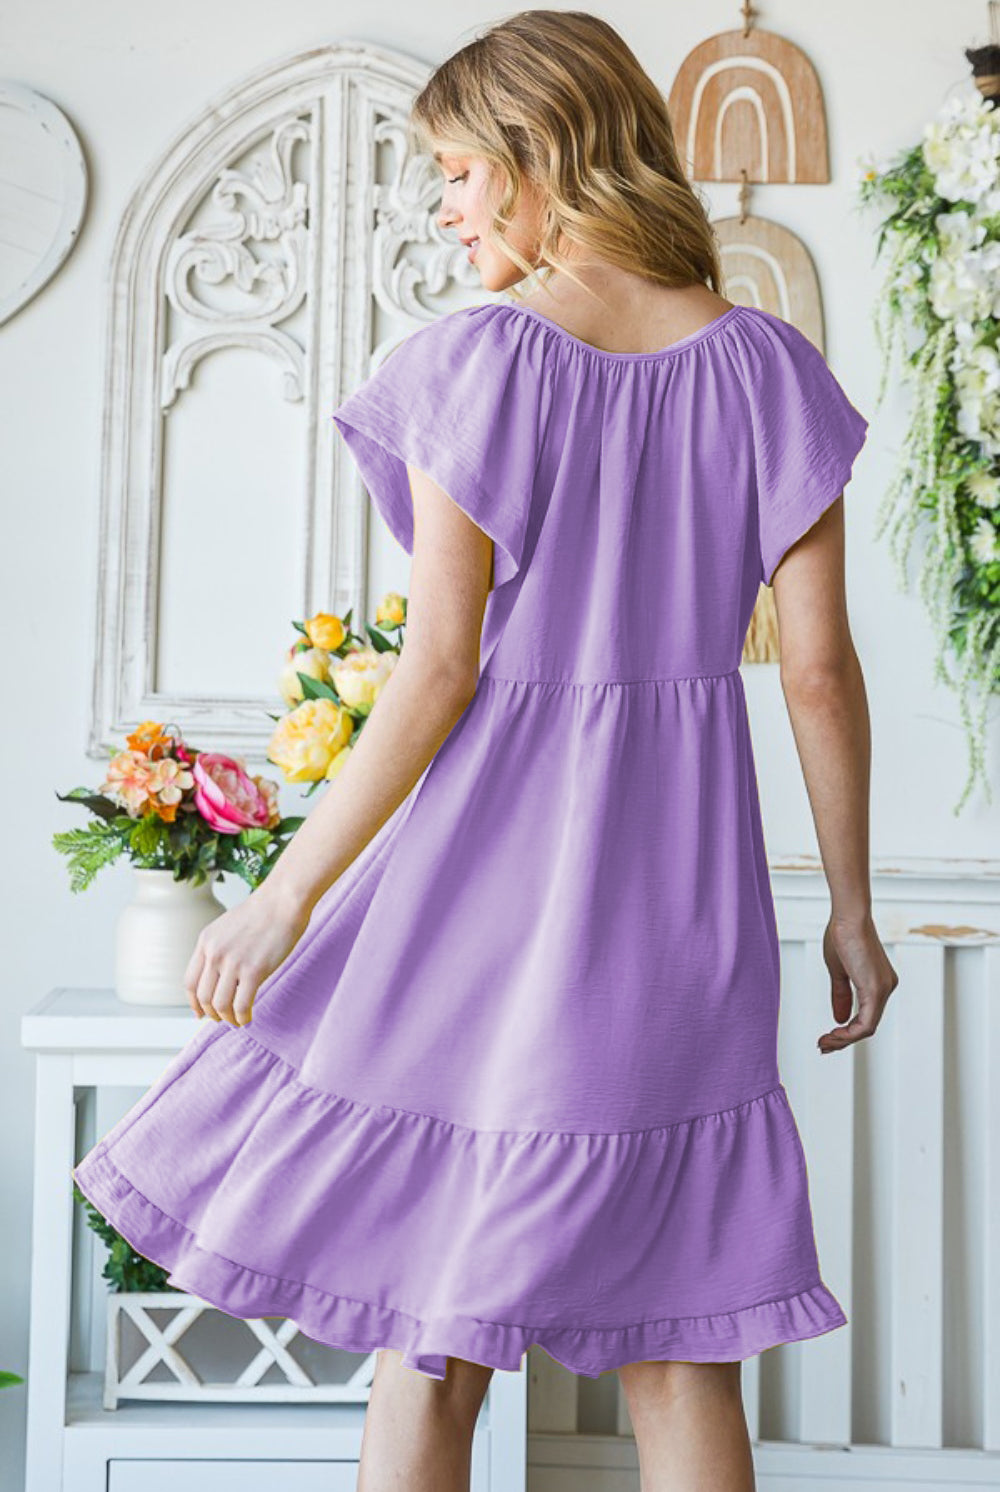 A woman in a summery setting wears a light lavender short sleeve dress with a ruffle hem, complemented by a wide-brimmed straw hat, embodying a fresh, spring-ready vibe.